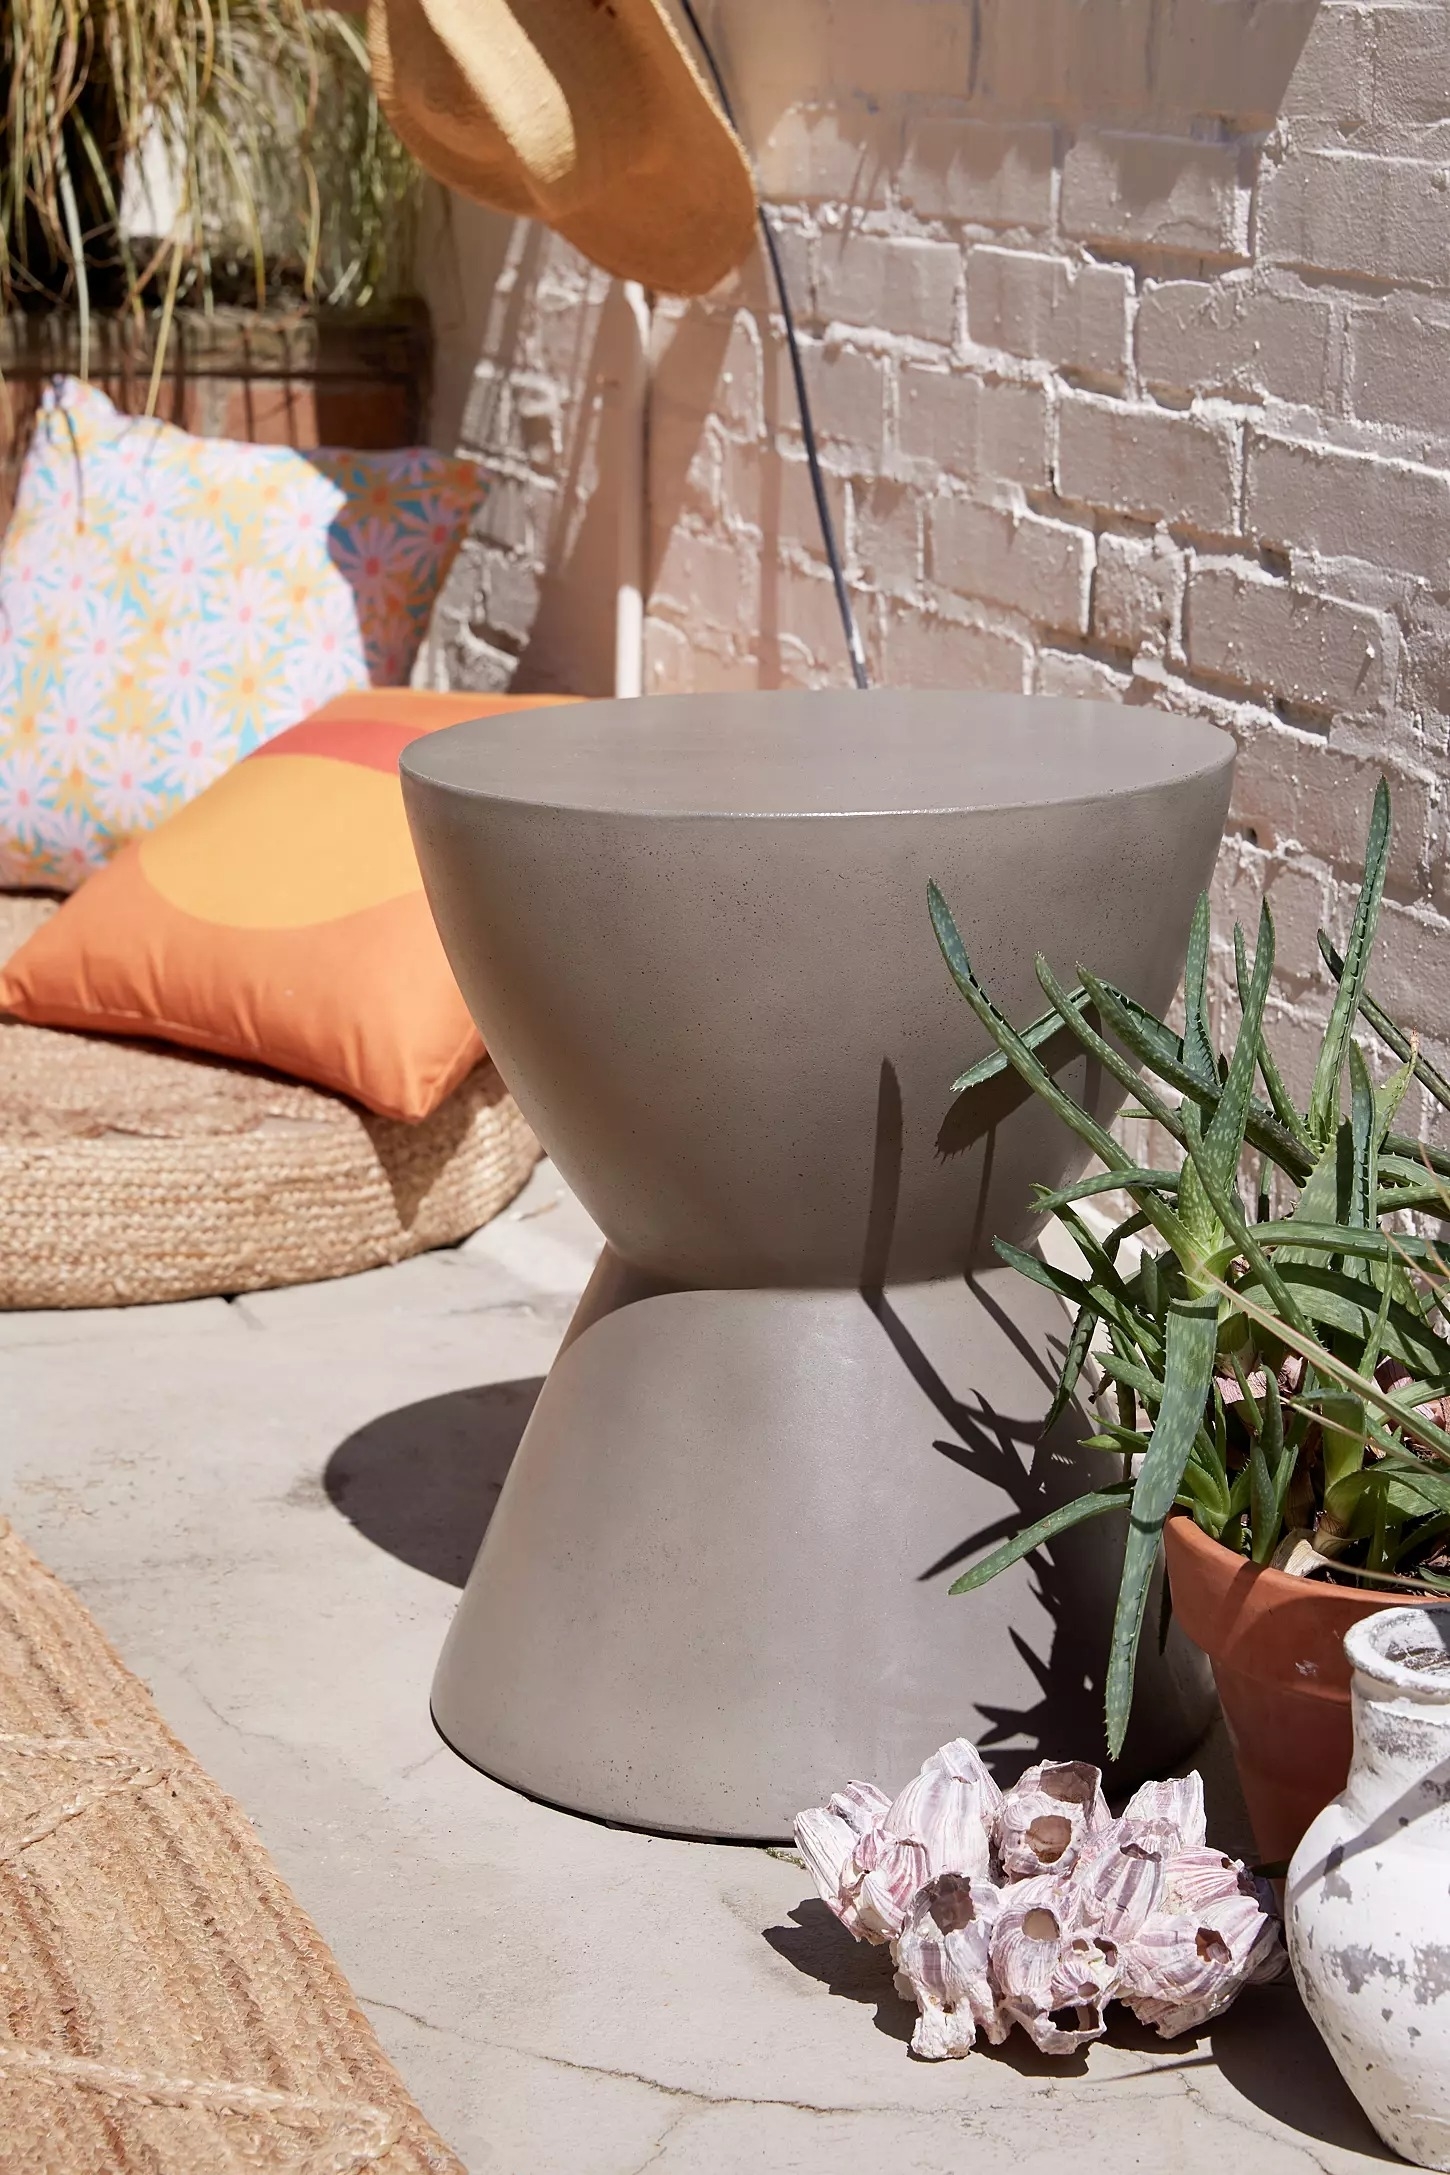 Concrete side table in an outdoor setting with plant and decorative items nearby